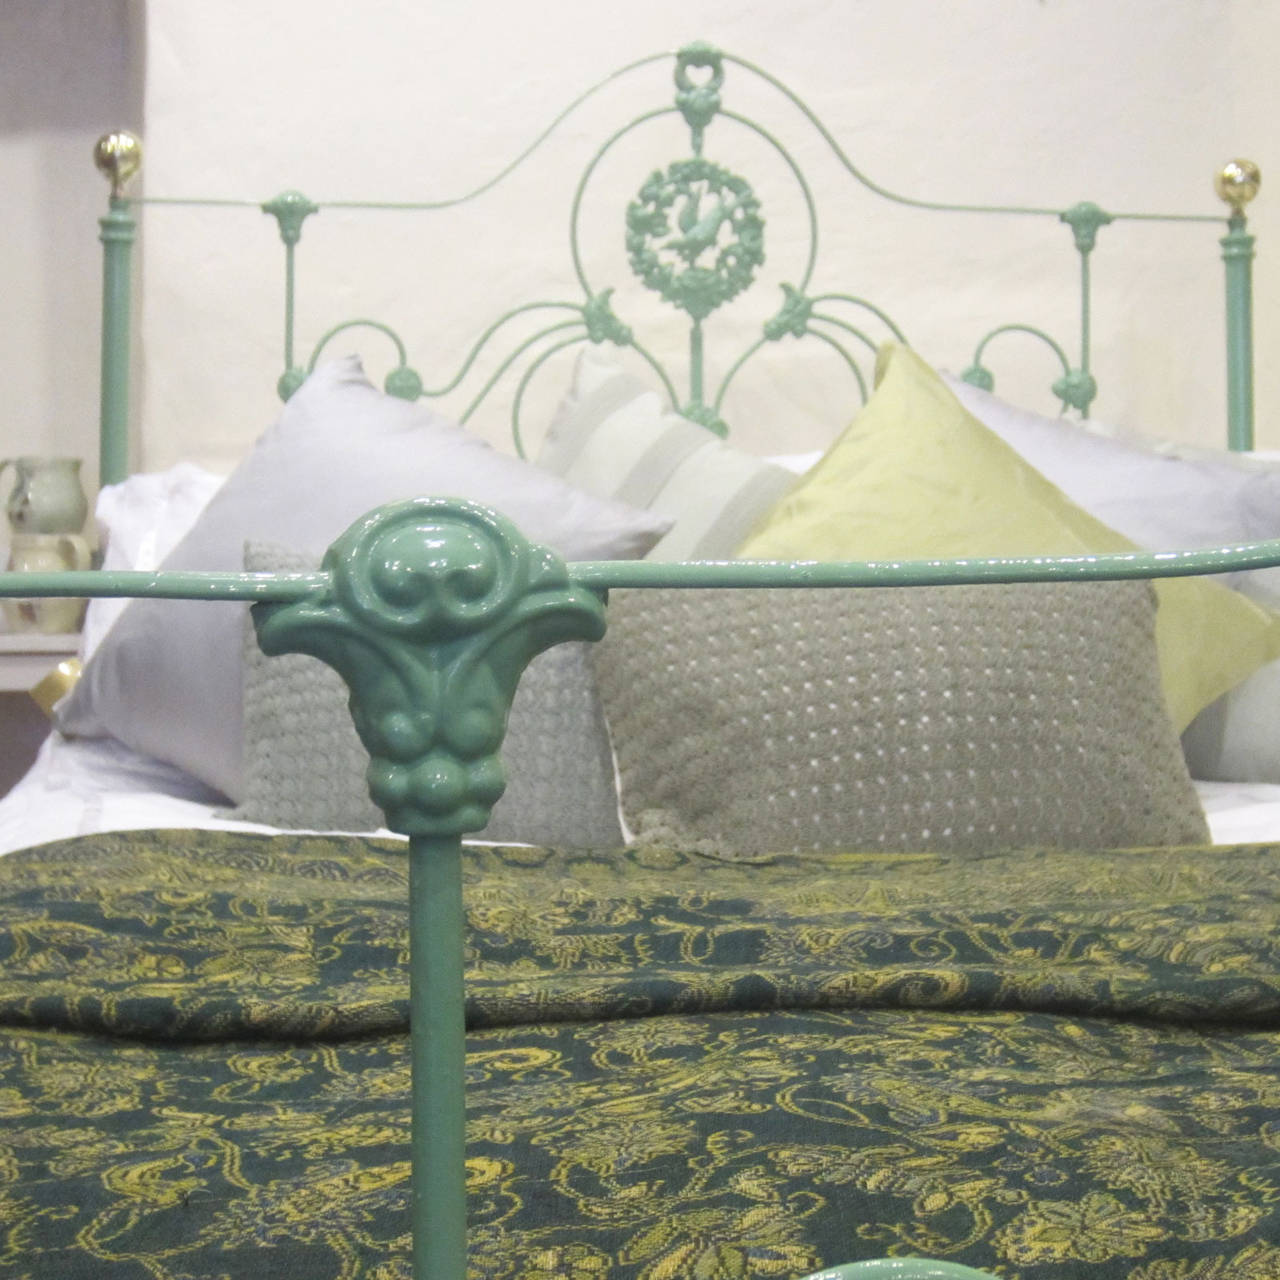 A double cast iron bed with ornate panel decoration featuring a 'bird's nest' and brass knobs. This bed has been powder coated in one of our new colors asparagus, a soft calming green.

The price is for the bedstead alone. The base, mattress,